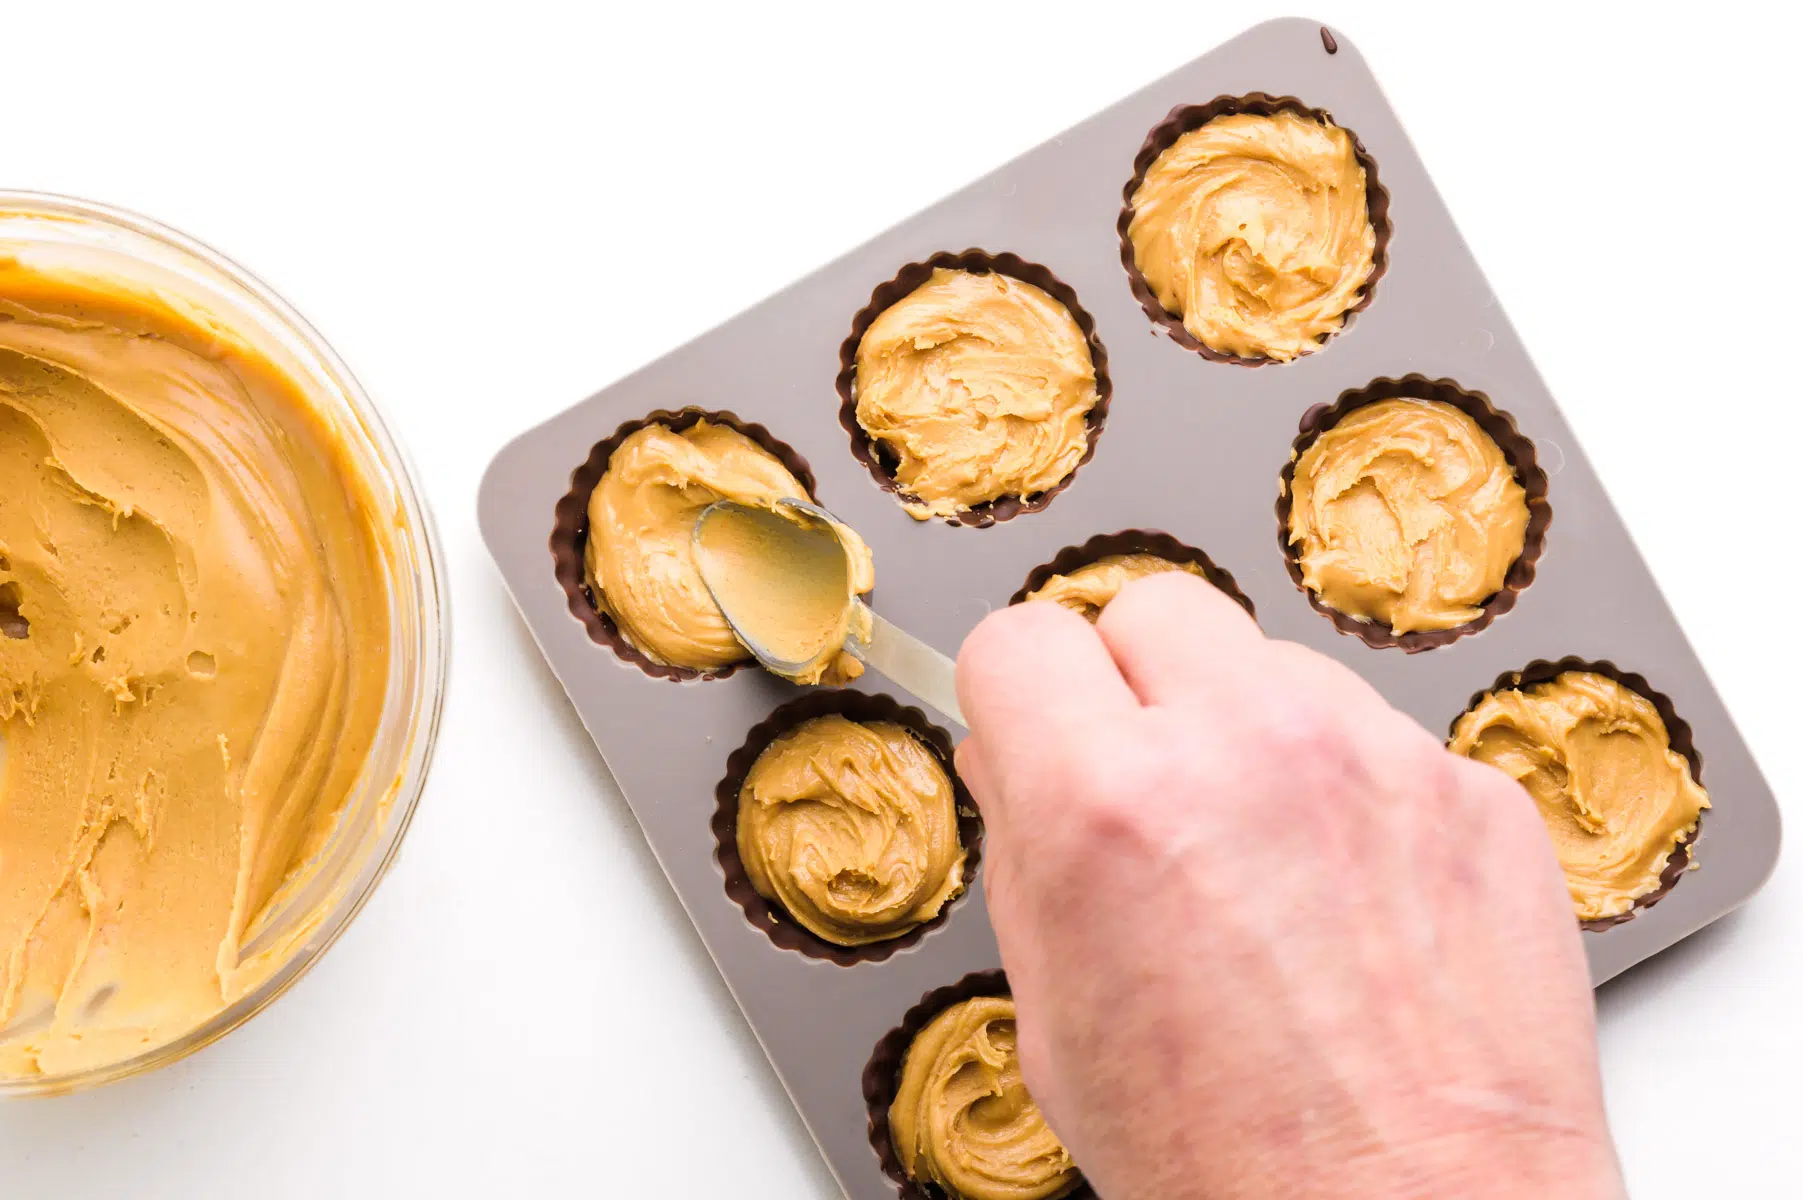 A hand holds a spoon pressing peanut butter over set chocolate in candy molds.